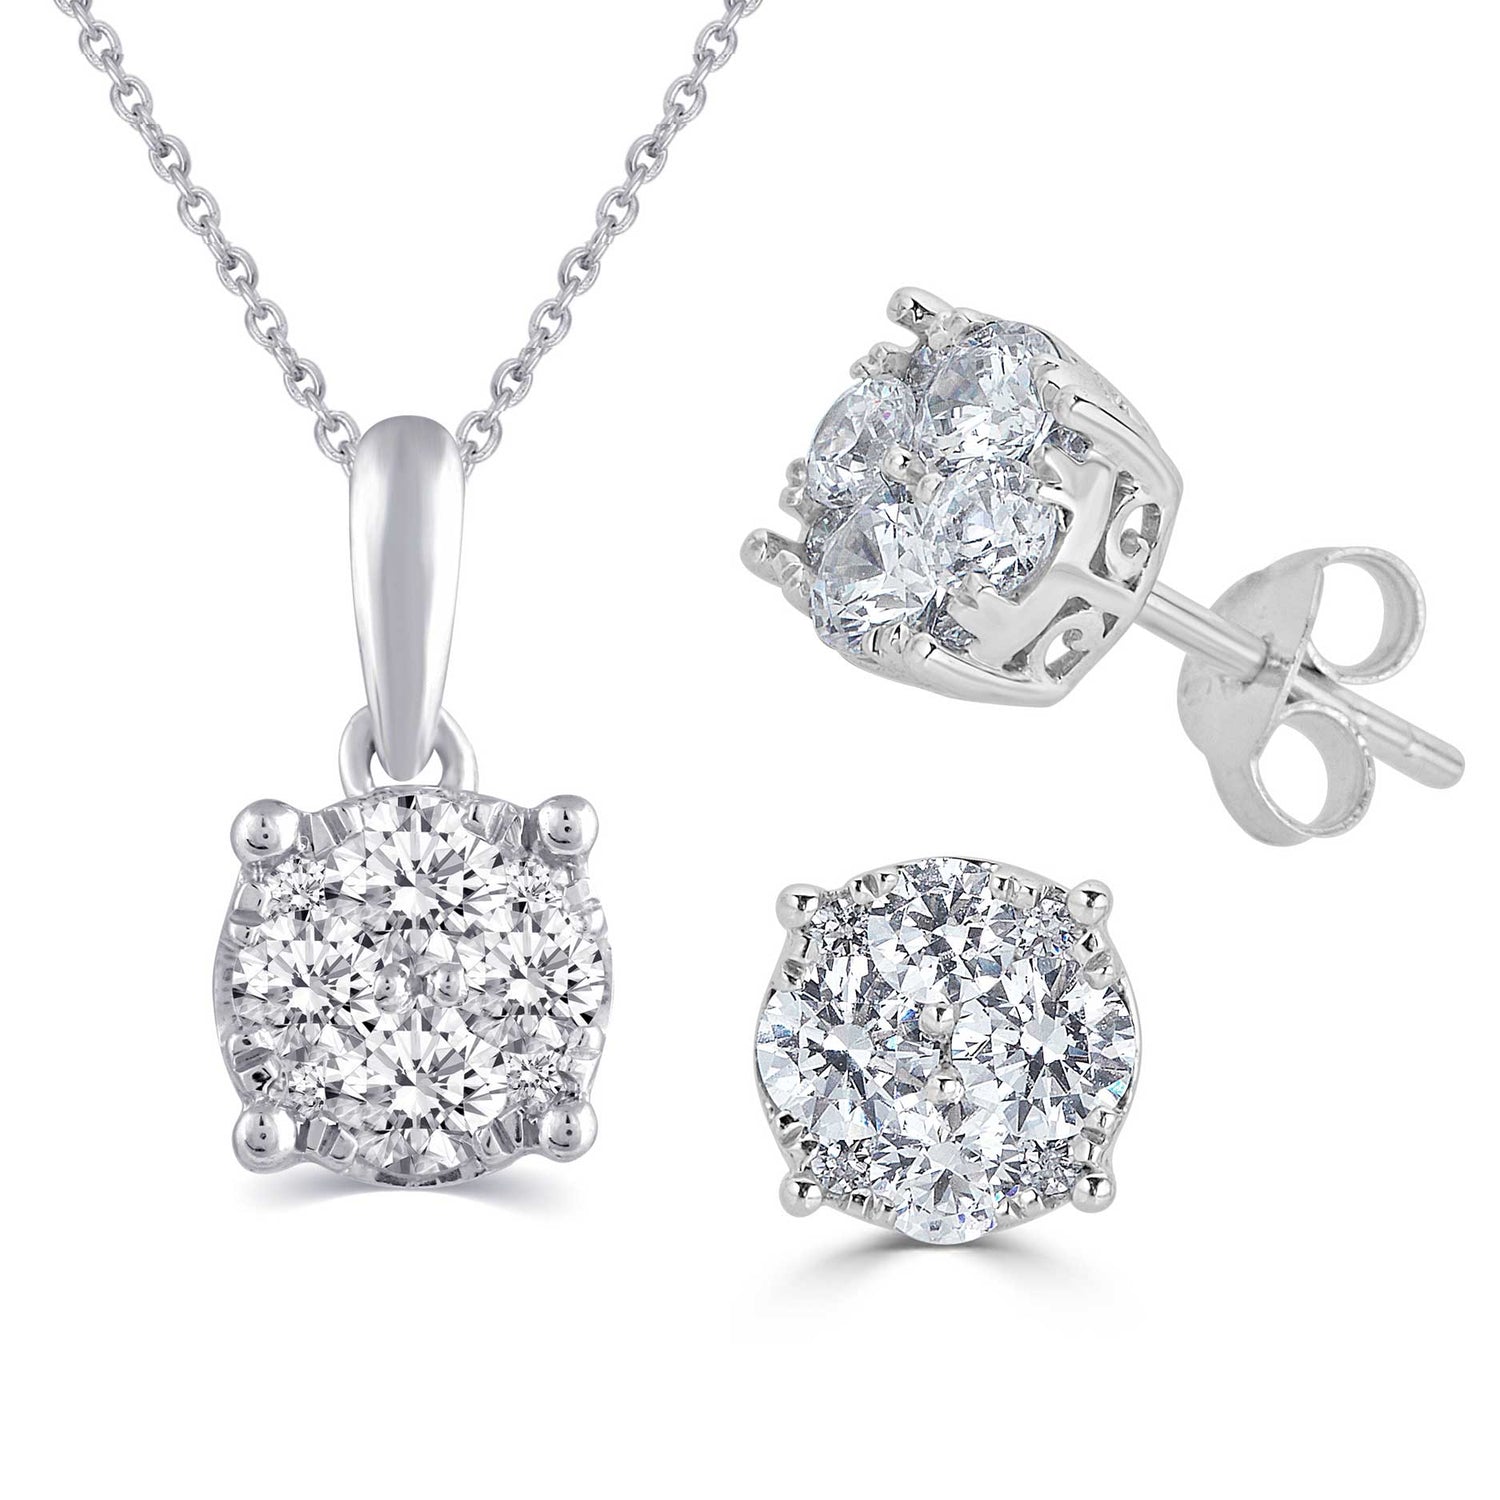 3/4 Carat TW Round Grand Cluster Diamond Earrings & Pendant Necklace Set in 925 Sterling Silver